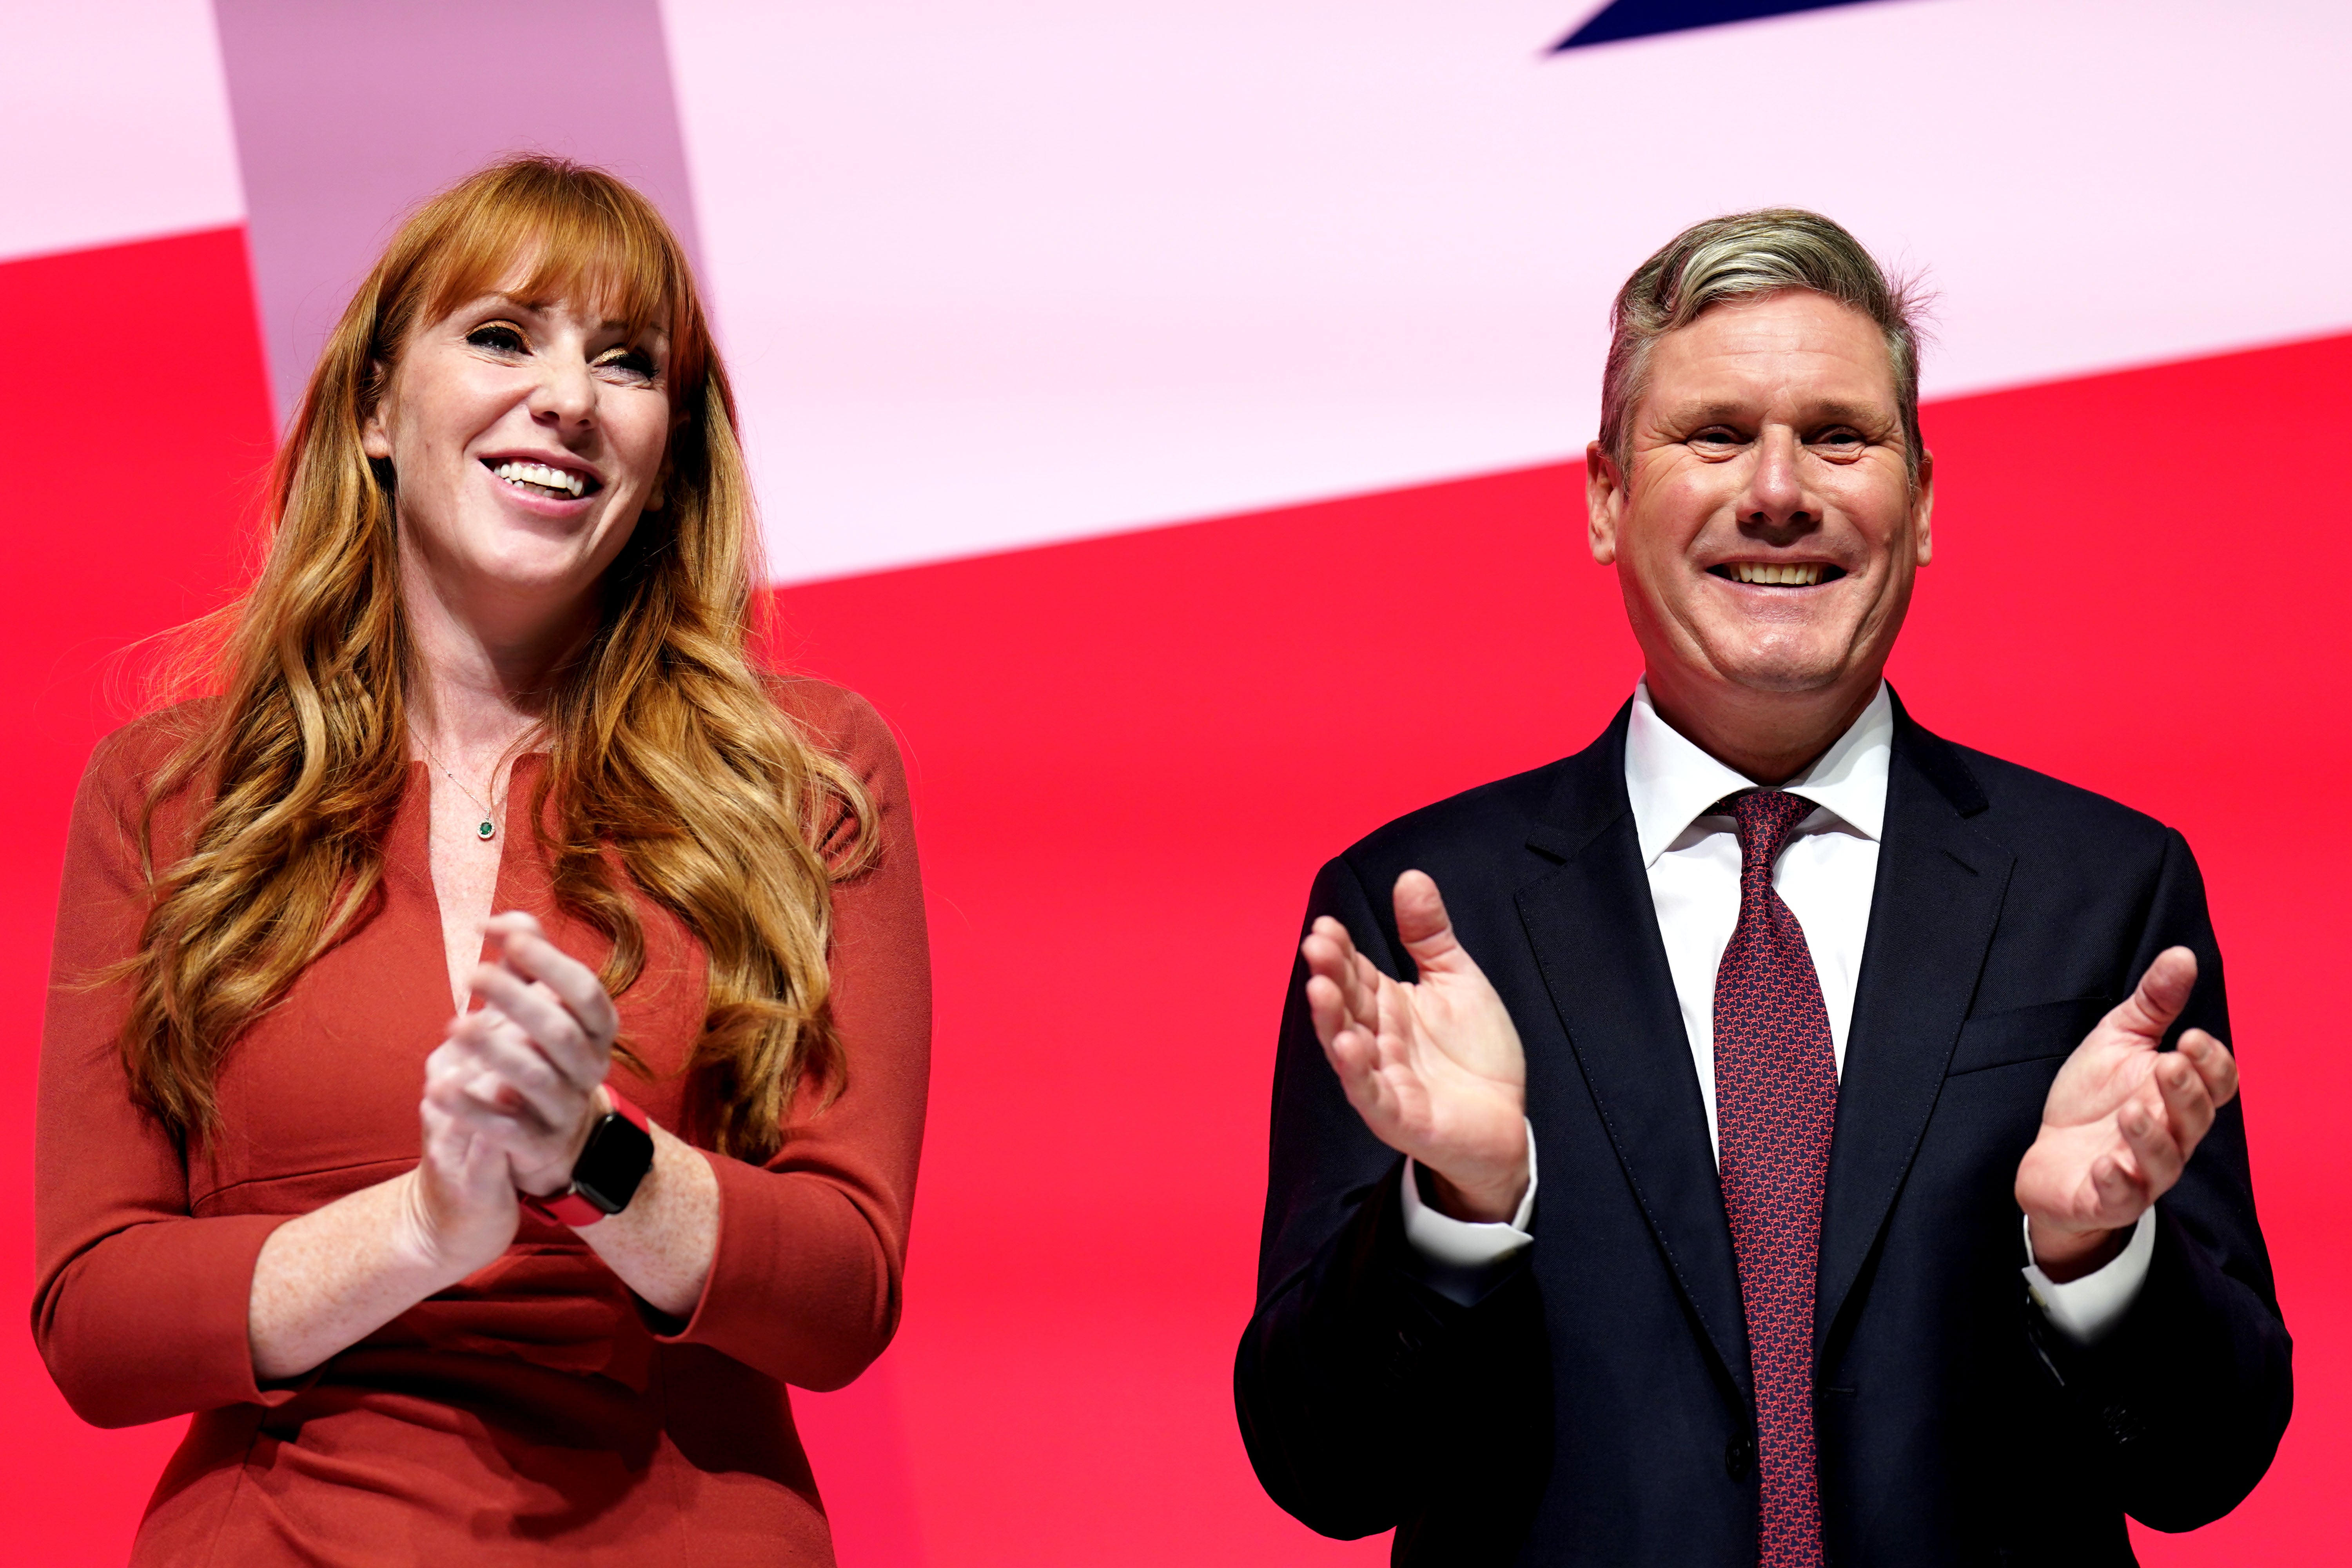 Keir Starmer may come to need Angela Rayner more than anyone else in his shadow cabinet